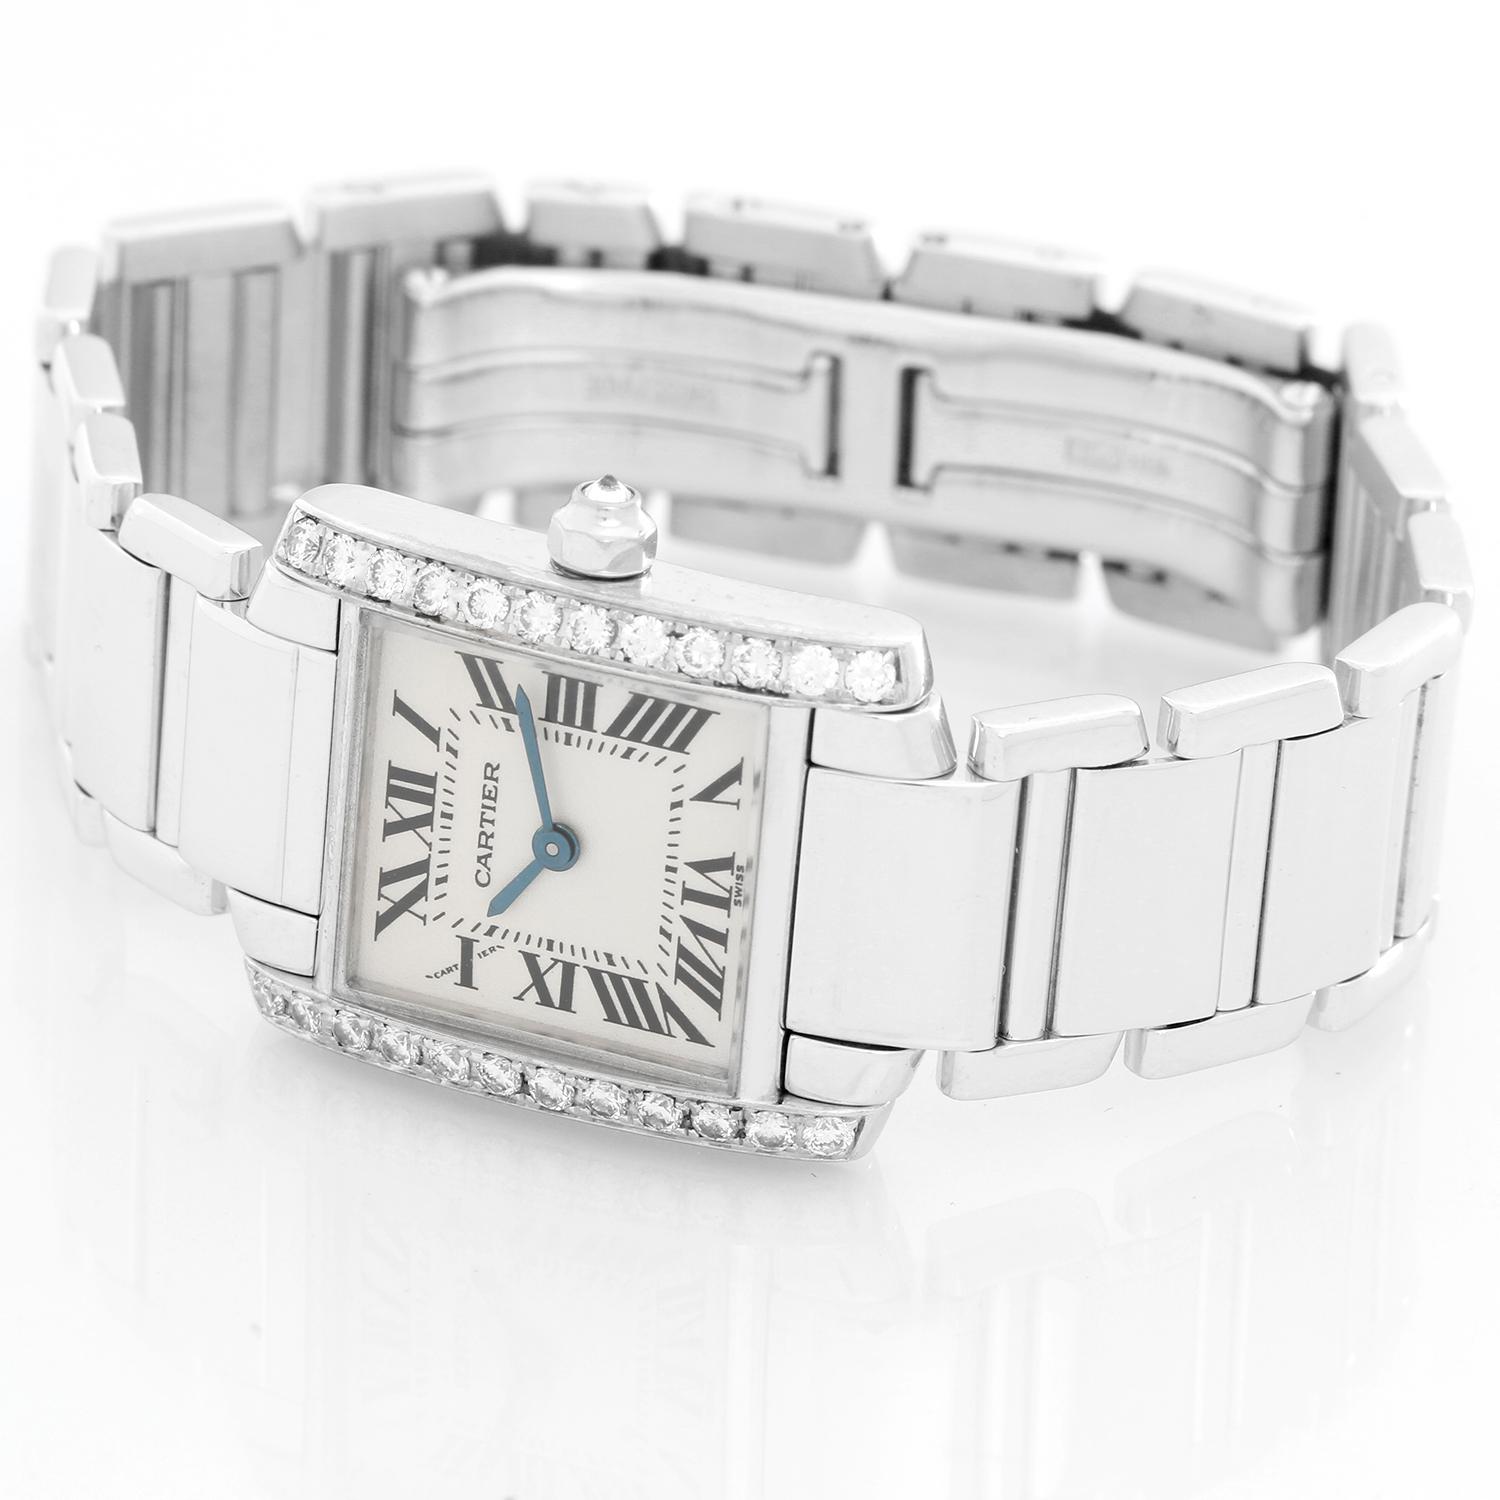 Cartier Tank Francaise 18k White Gold & Diamonds Ladies Watch WE1002S3 -  Quartz. 18k white gold case with factory diamond bezel (20mm x 25mm). Ivory colored dial with black Roman numerals. 18k white gold Cartier bracelet with deployant clasp.